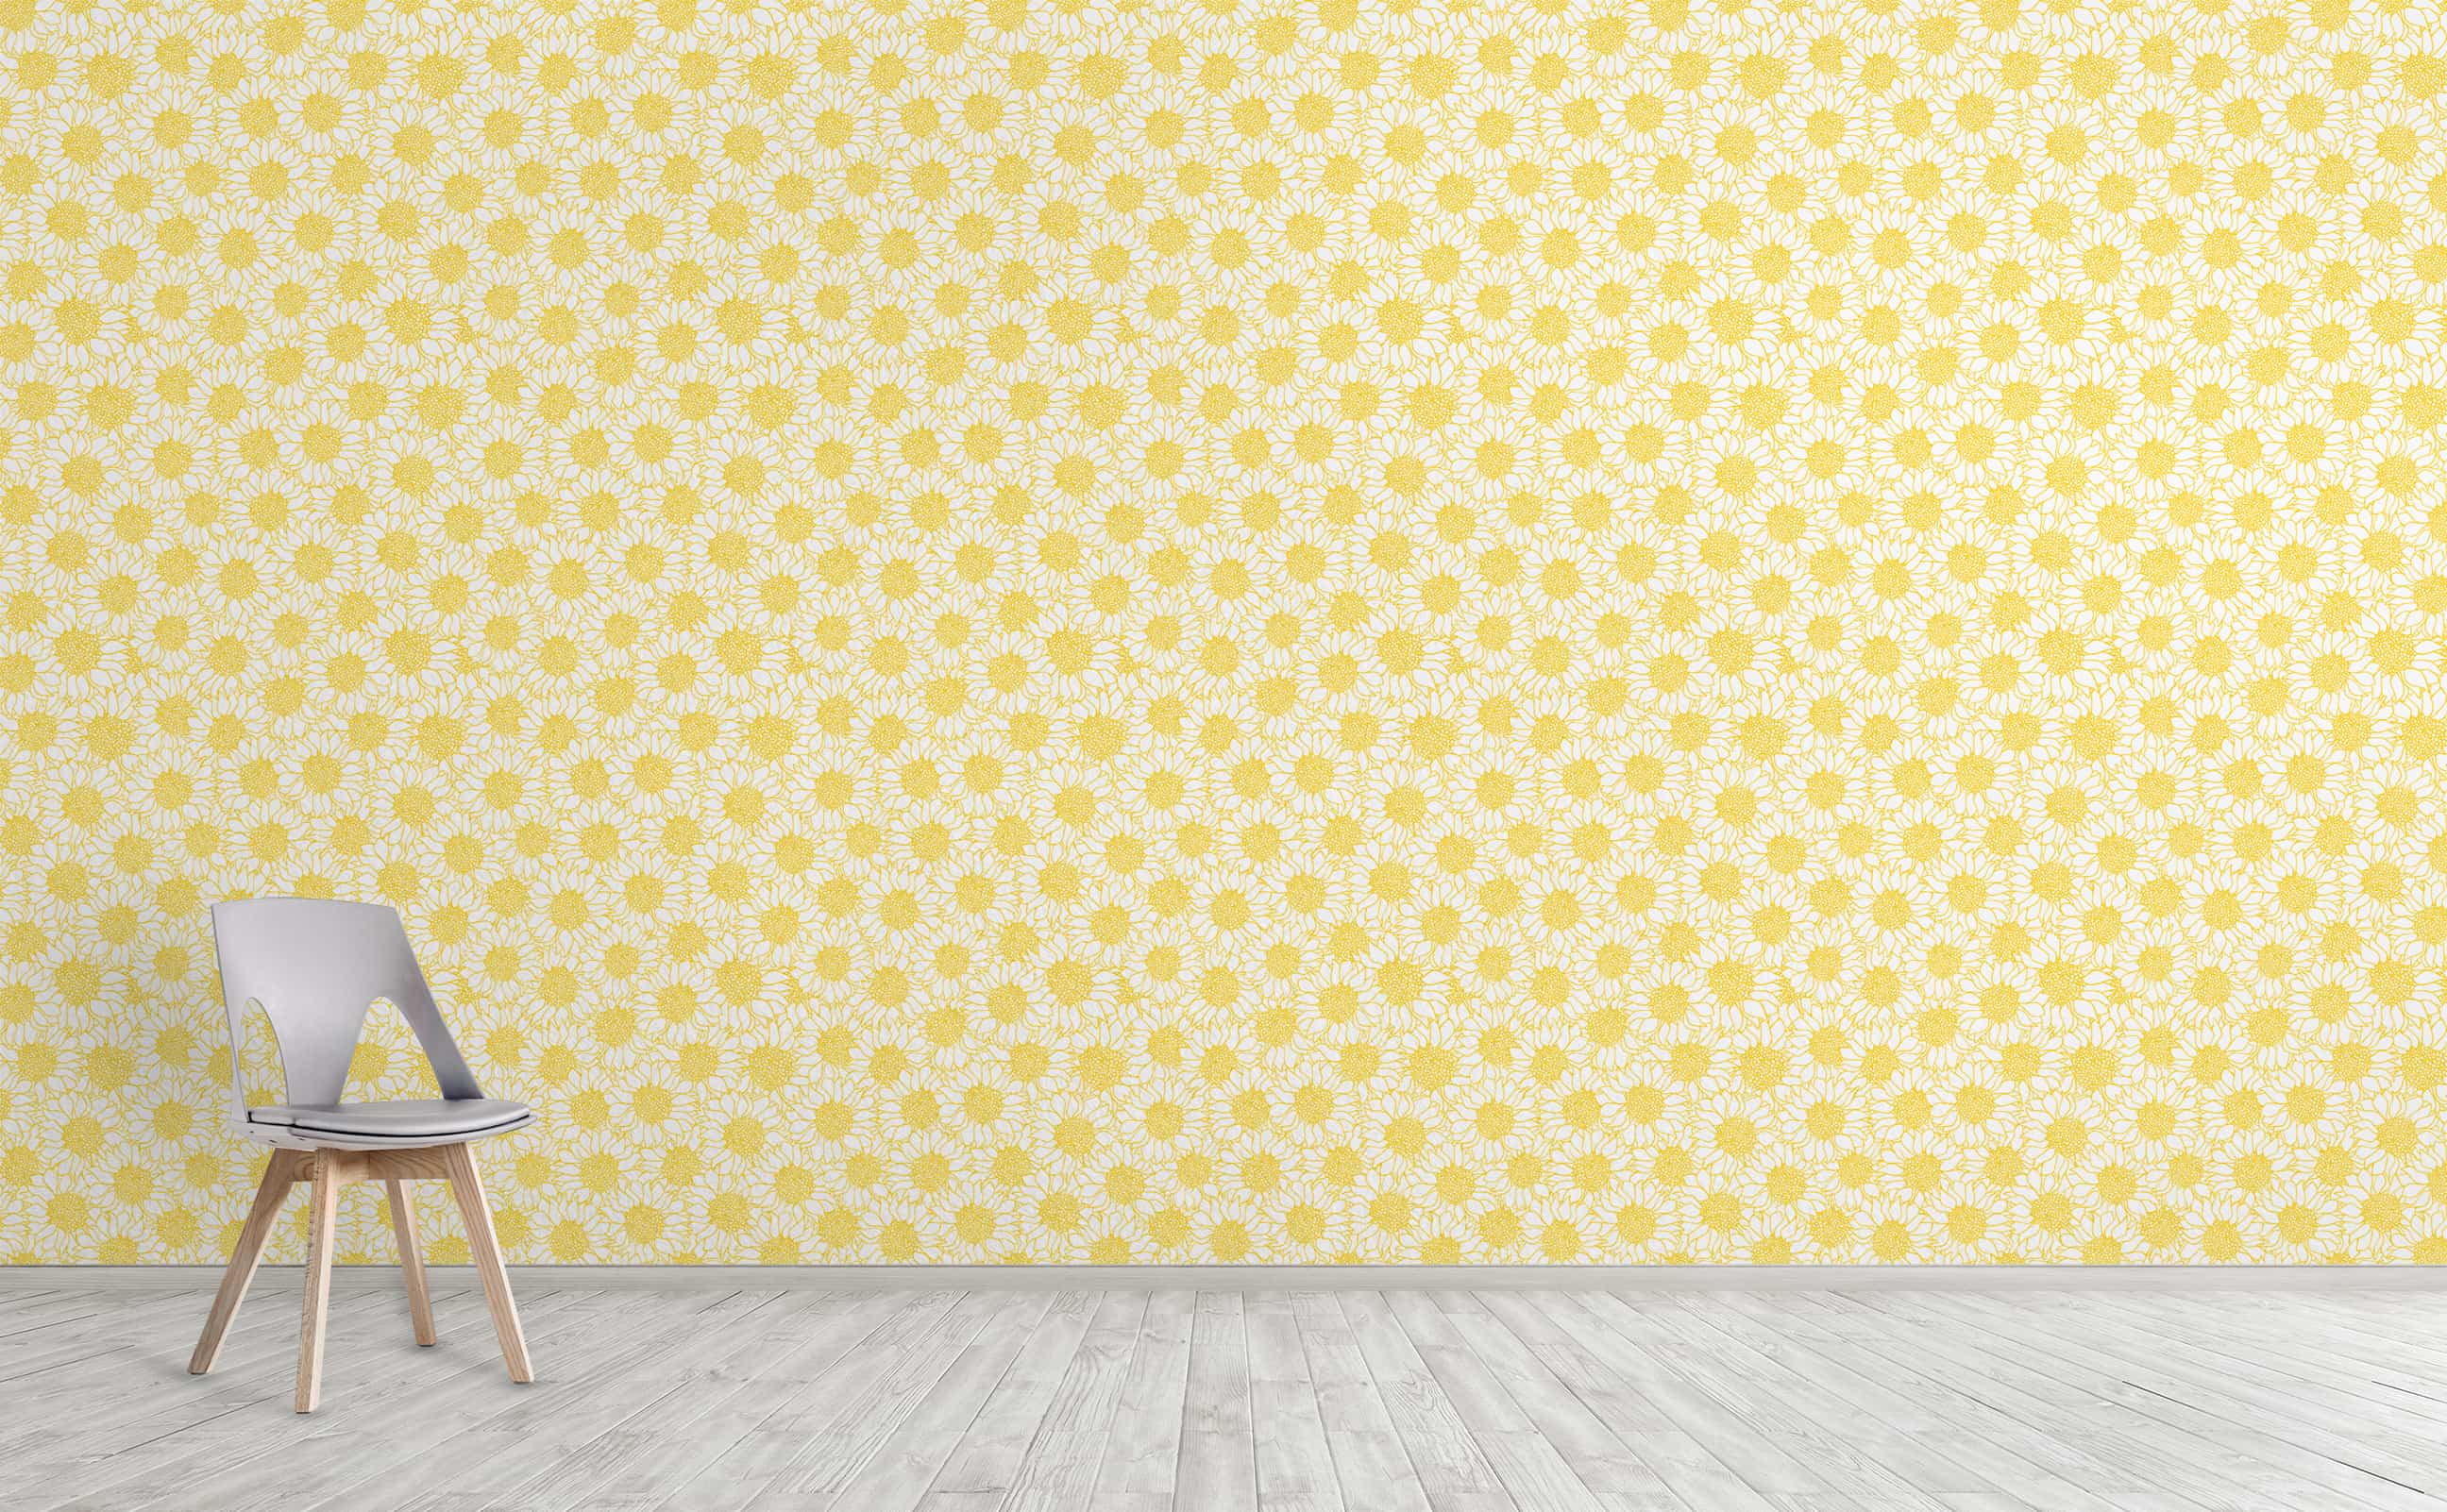 Cheerful Yellow Sunflower Sketch White Background Wallpaper For